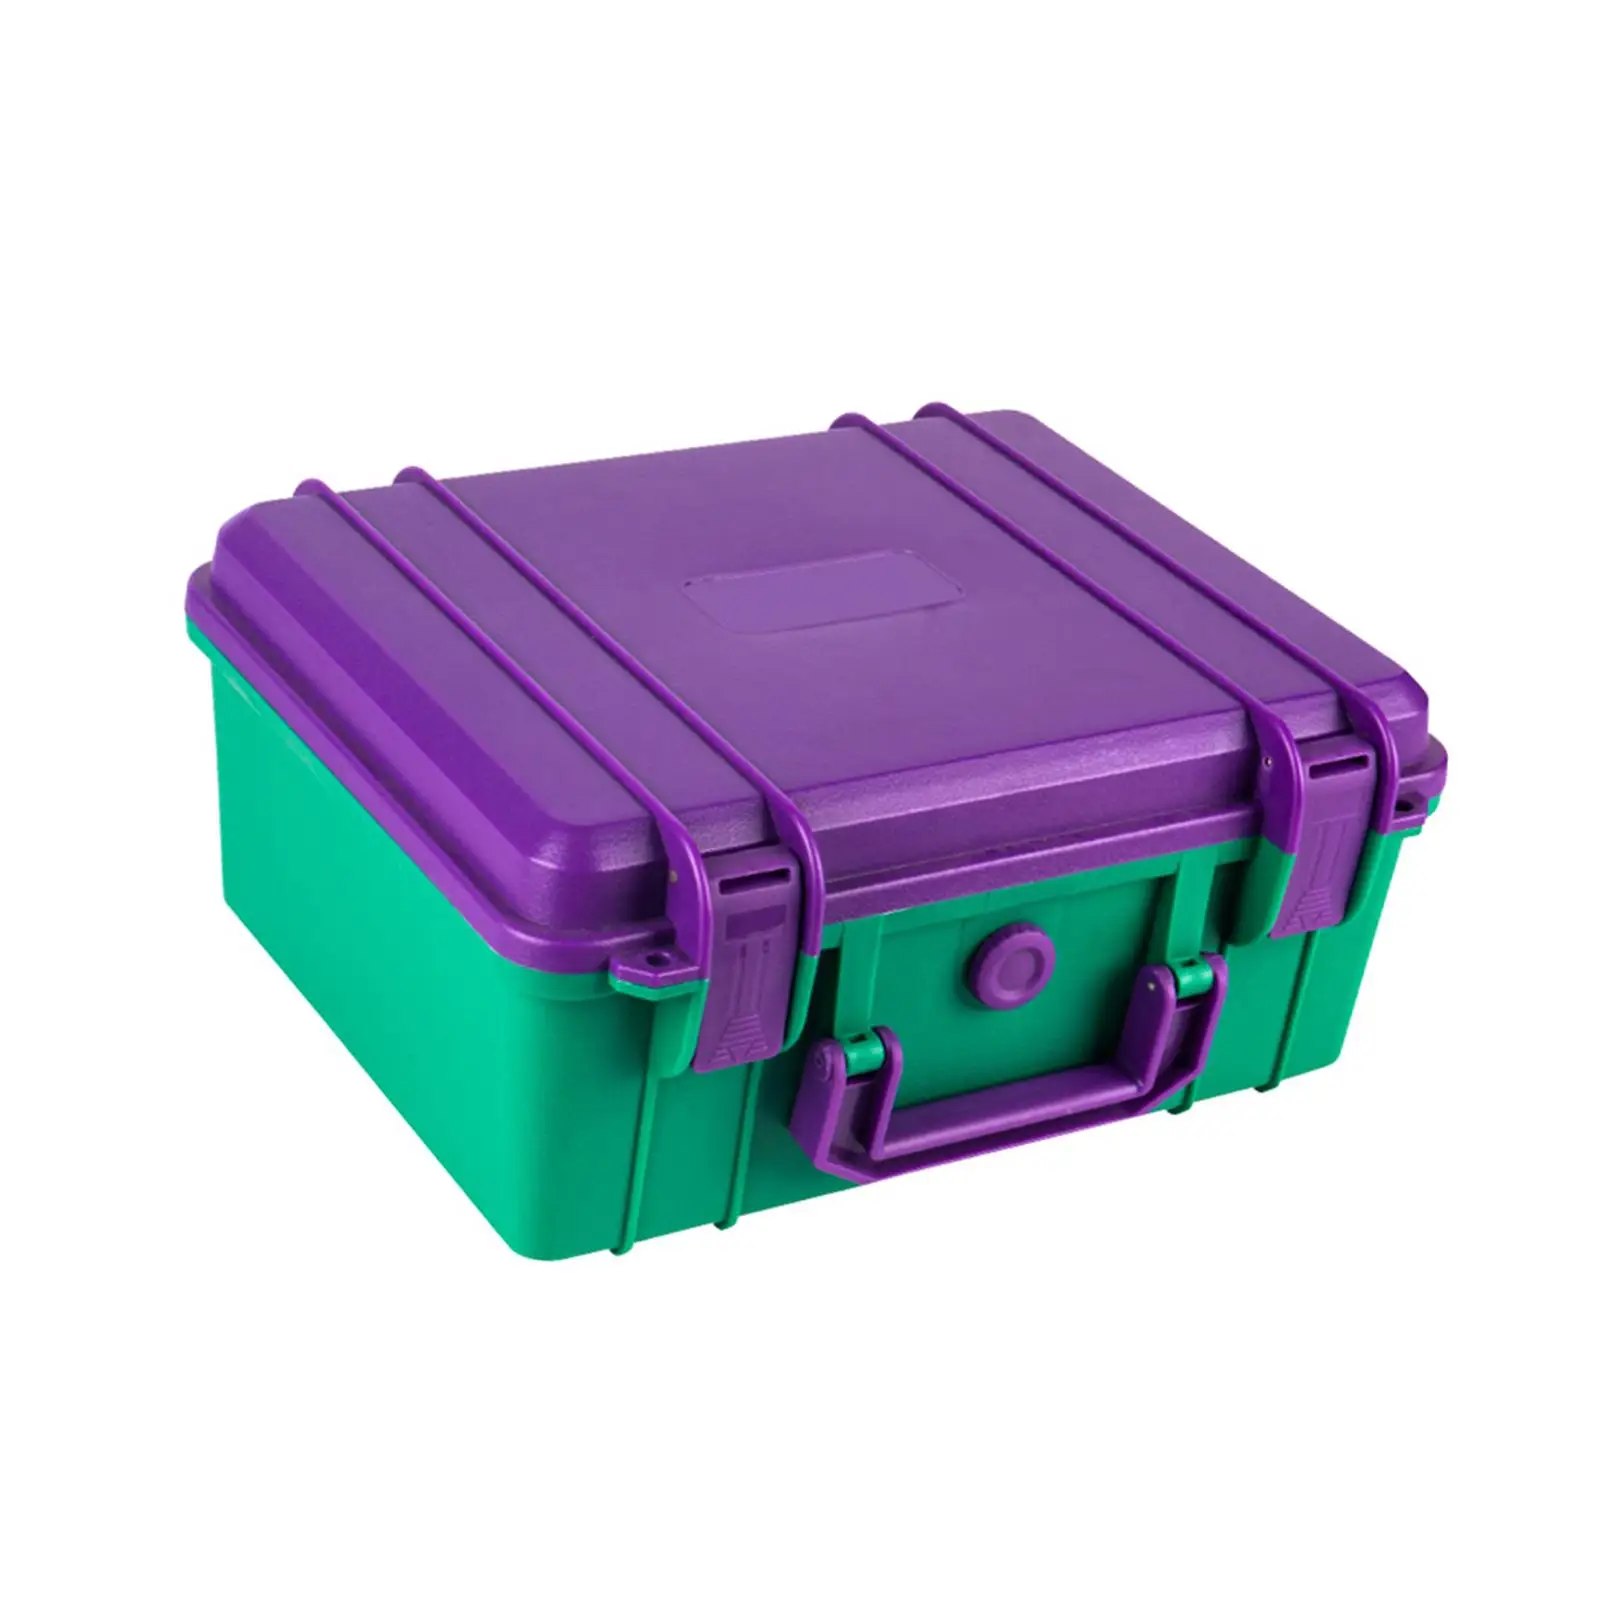 Protective Case Violet and Green Organization Portable Outdoor Camping Accessories Organizer 280x240x130mm Safety Tool Case